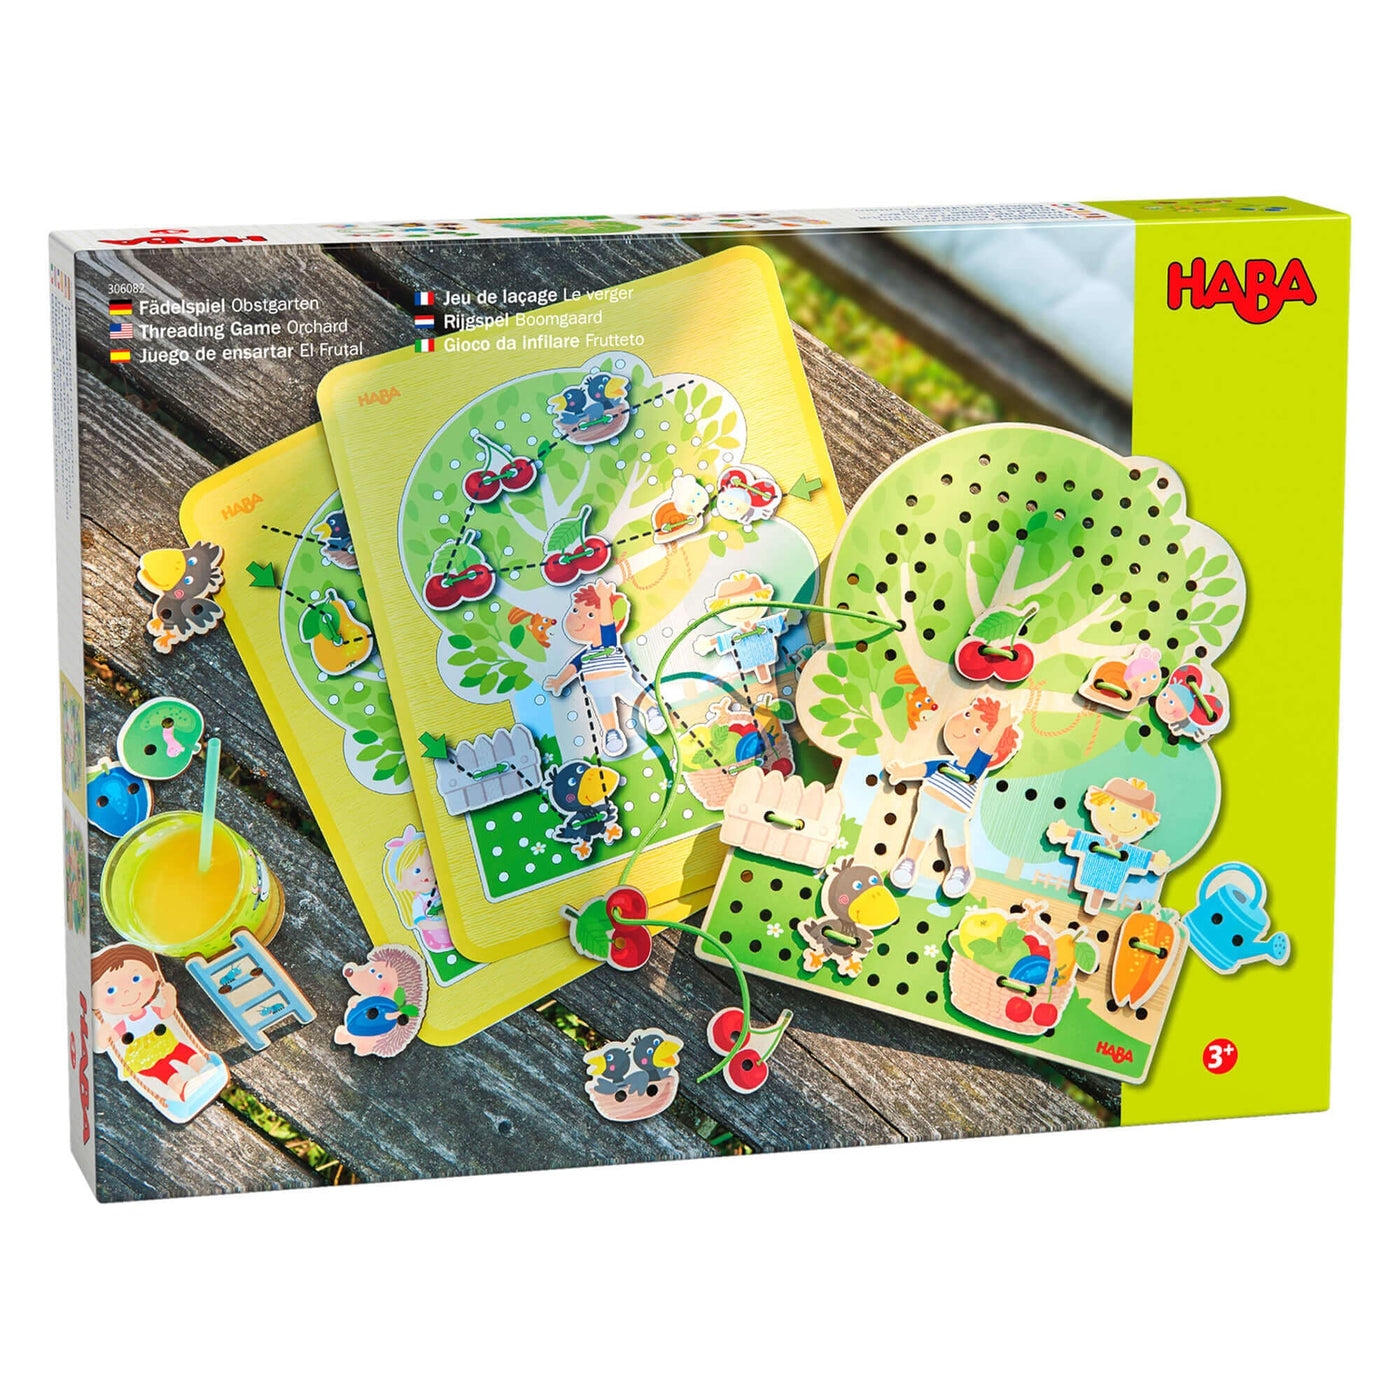 Orchard 31 Piece Threading Game by HABA game box